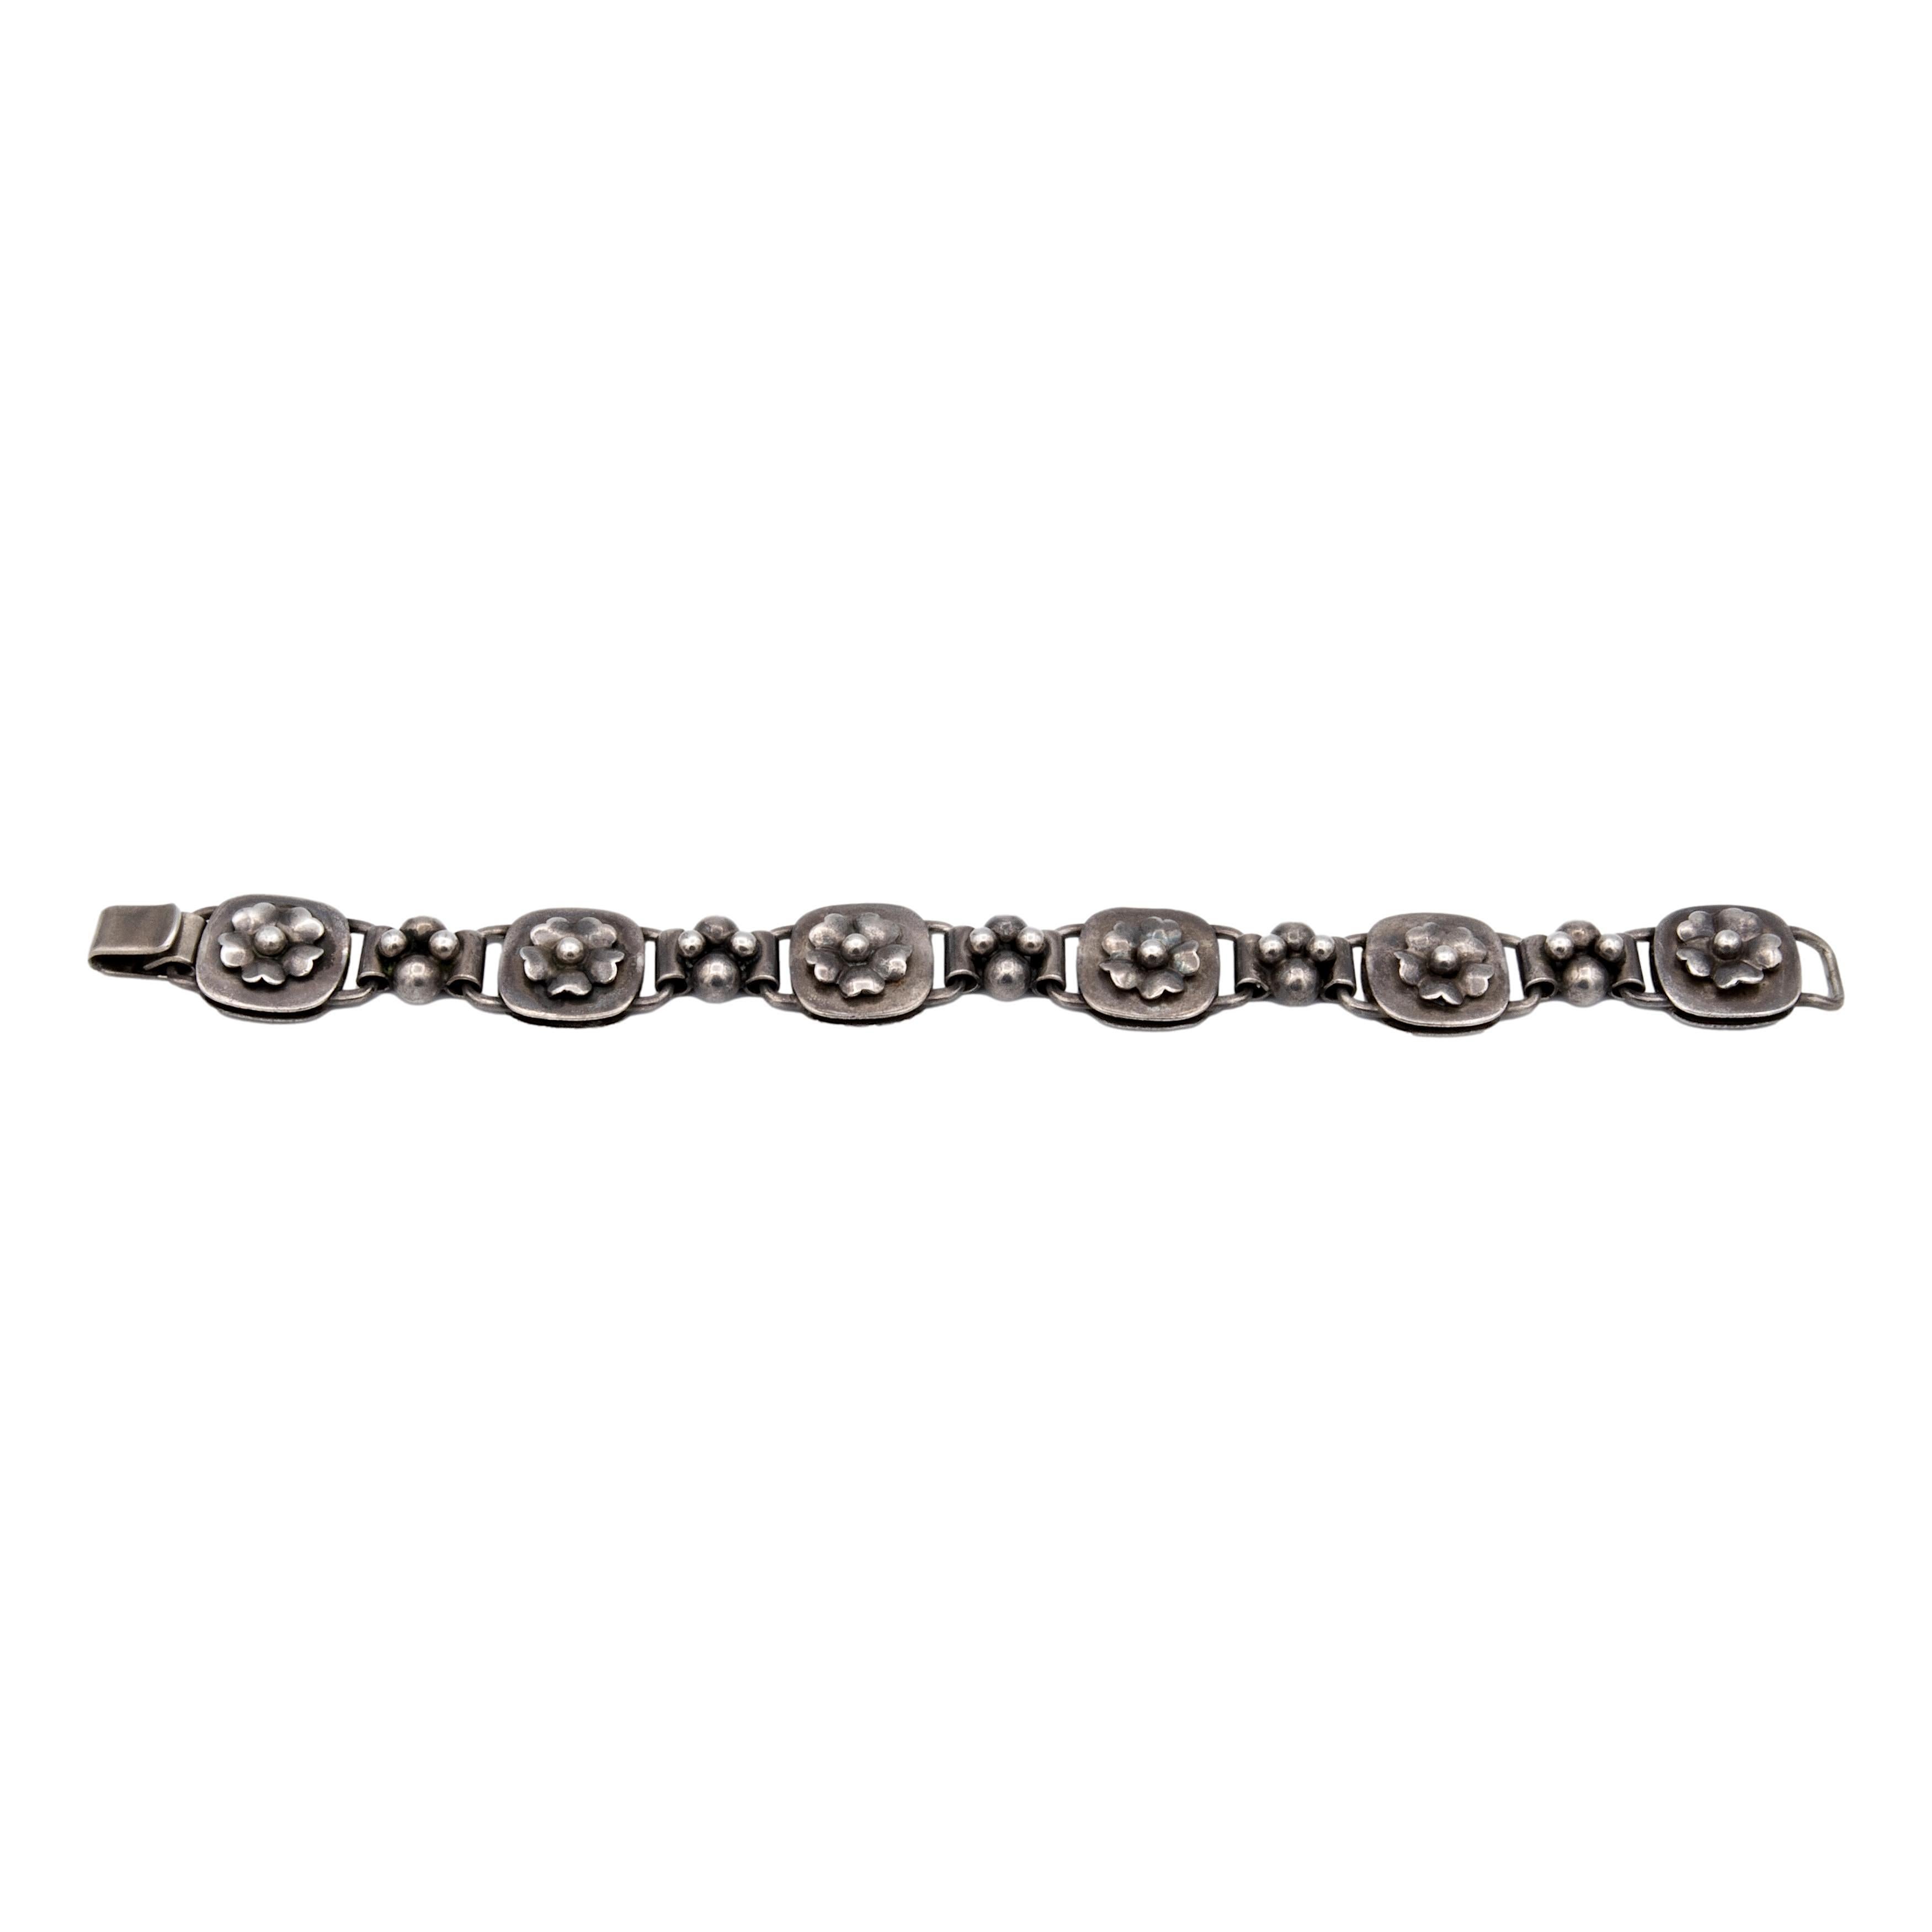 Vintage Georg Jensen bracelet, a sterling silver masterpiece featuring six exquisite floral motif sections with a slide hook lock mechanism. Georg Jensen's renowned craftsmanship shines through in this piece, reflecting his legacy of high-quality